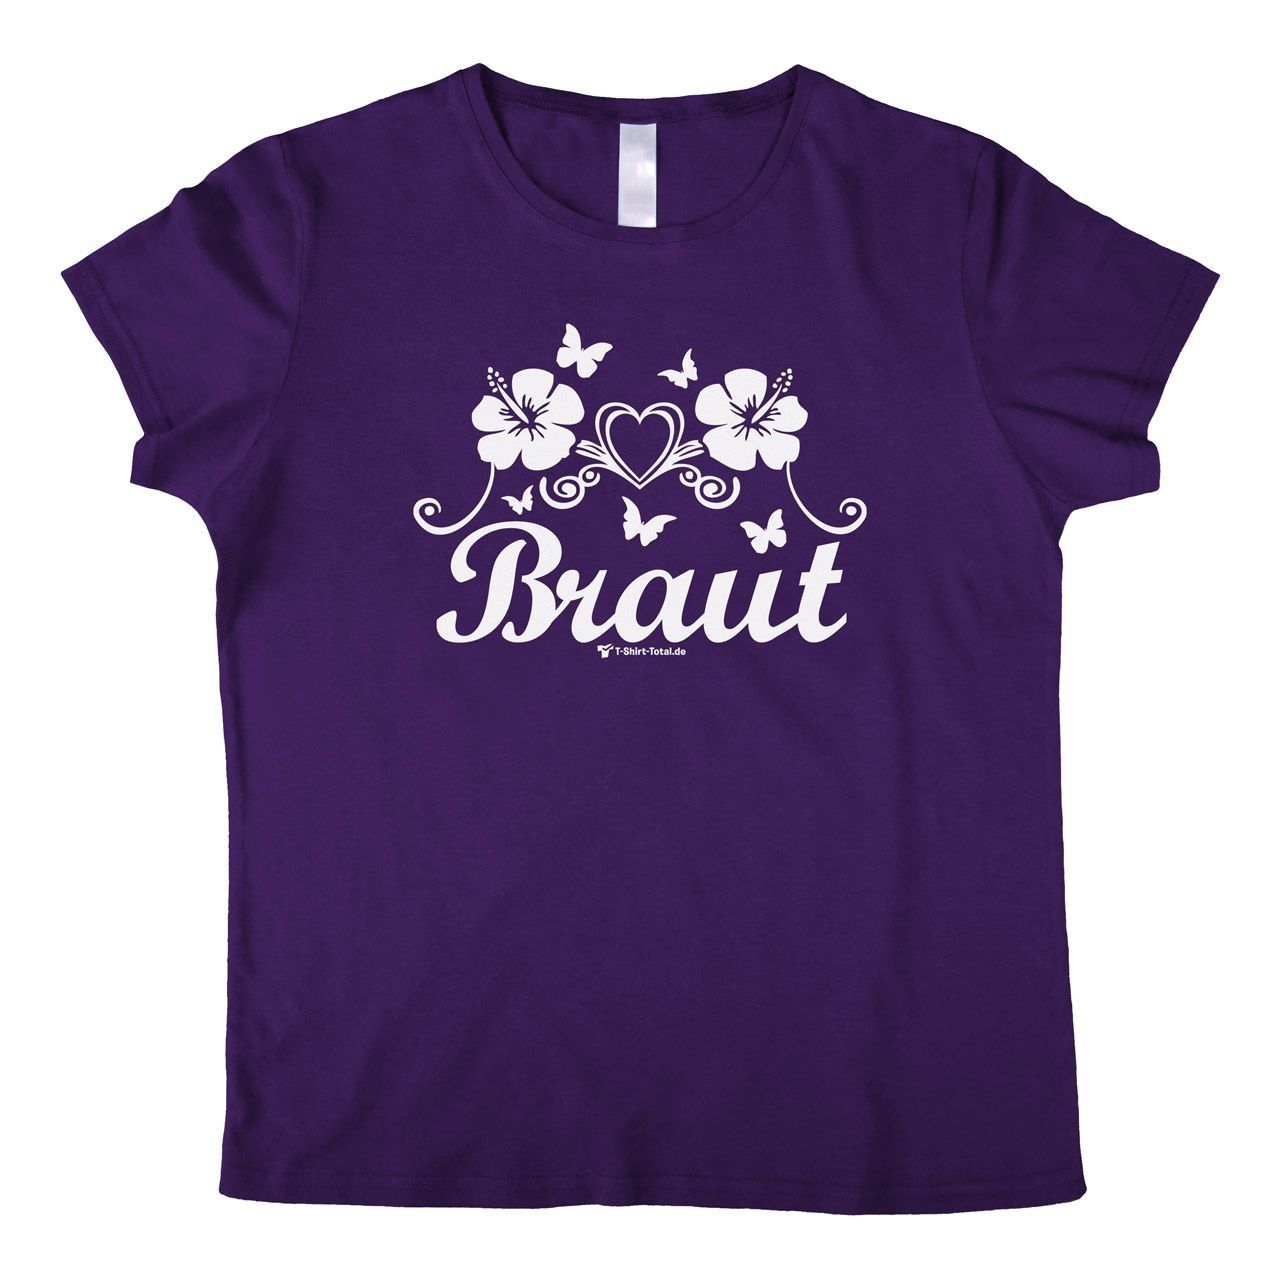 Die Braut Woman T-Shirt lila Extra Large